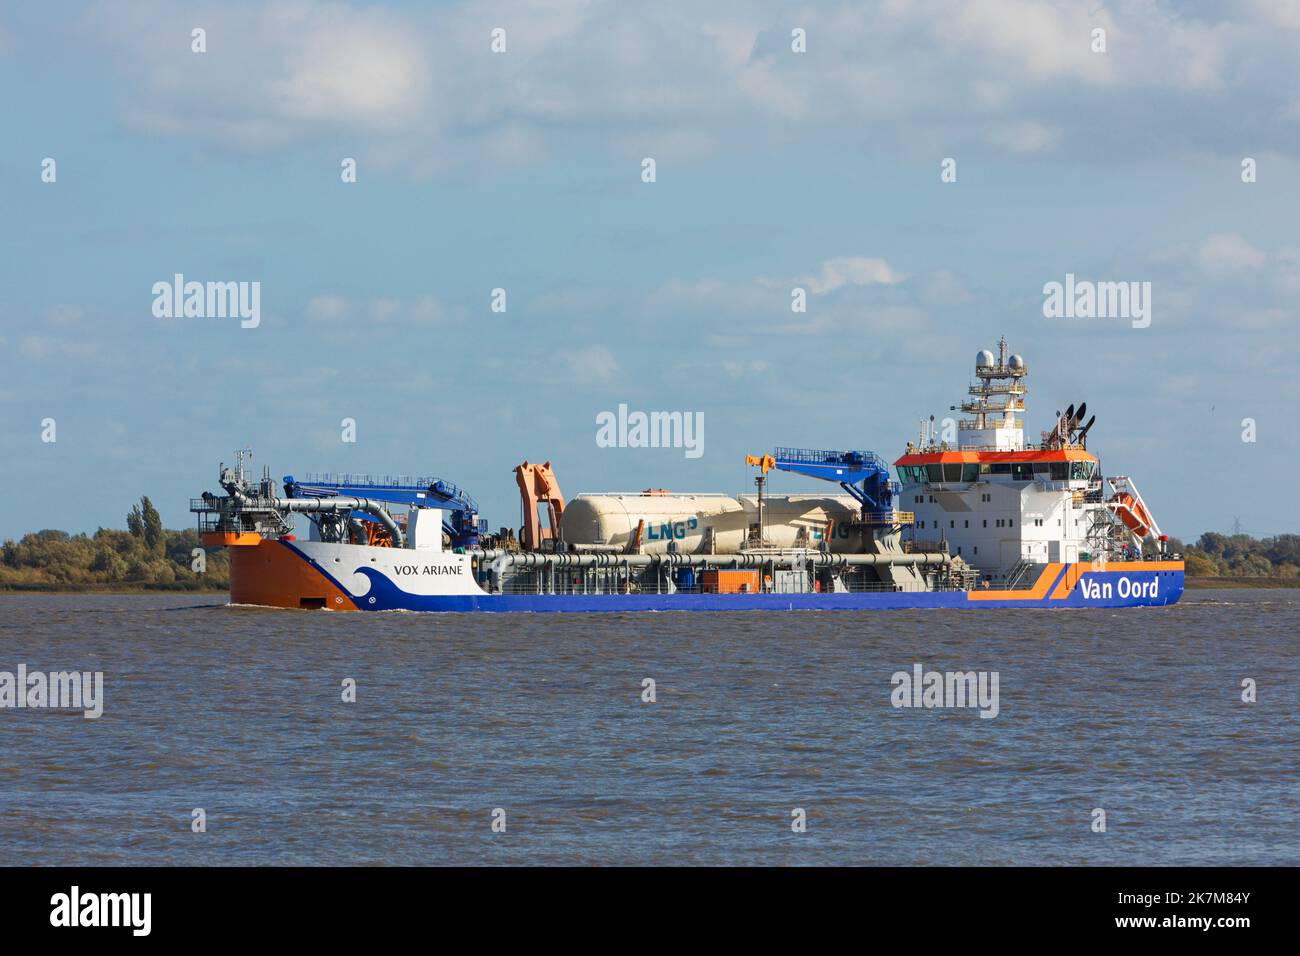 NG-powered hopper dredger VOX ARIANE operated by Dutch company Van Oord on Elbe river Stock Photo